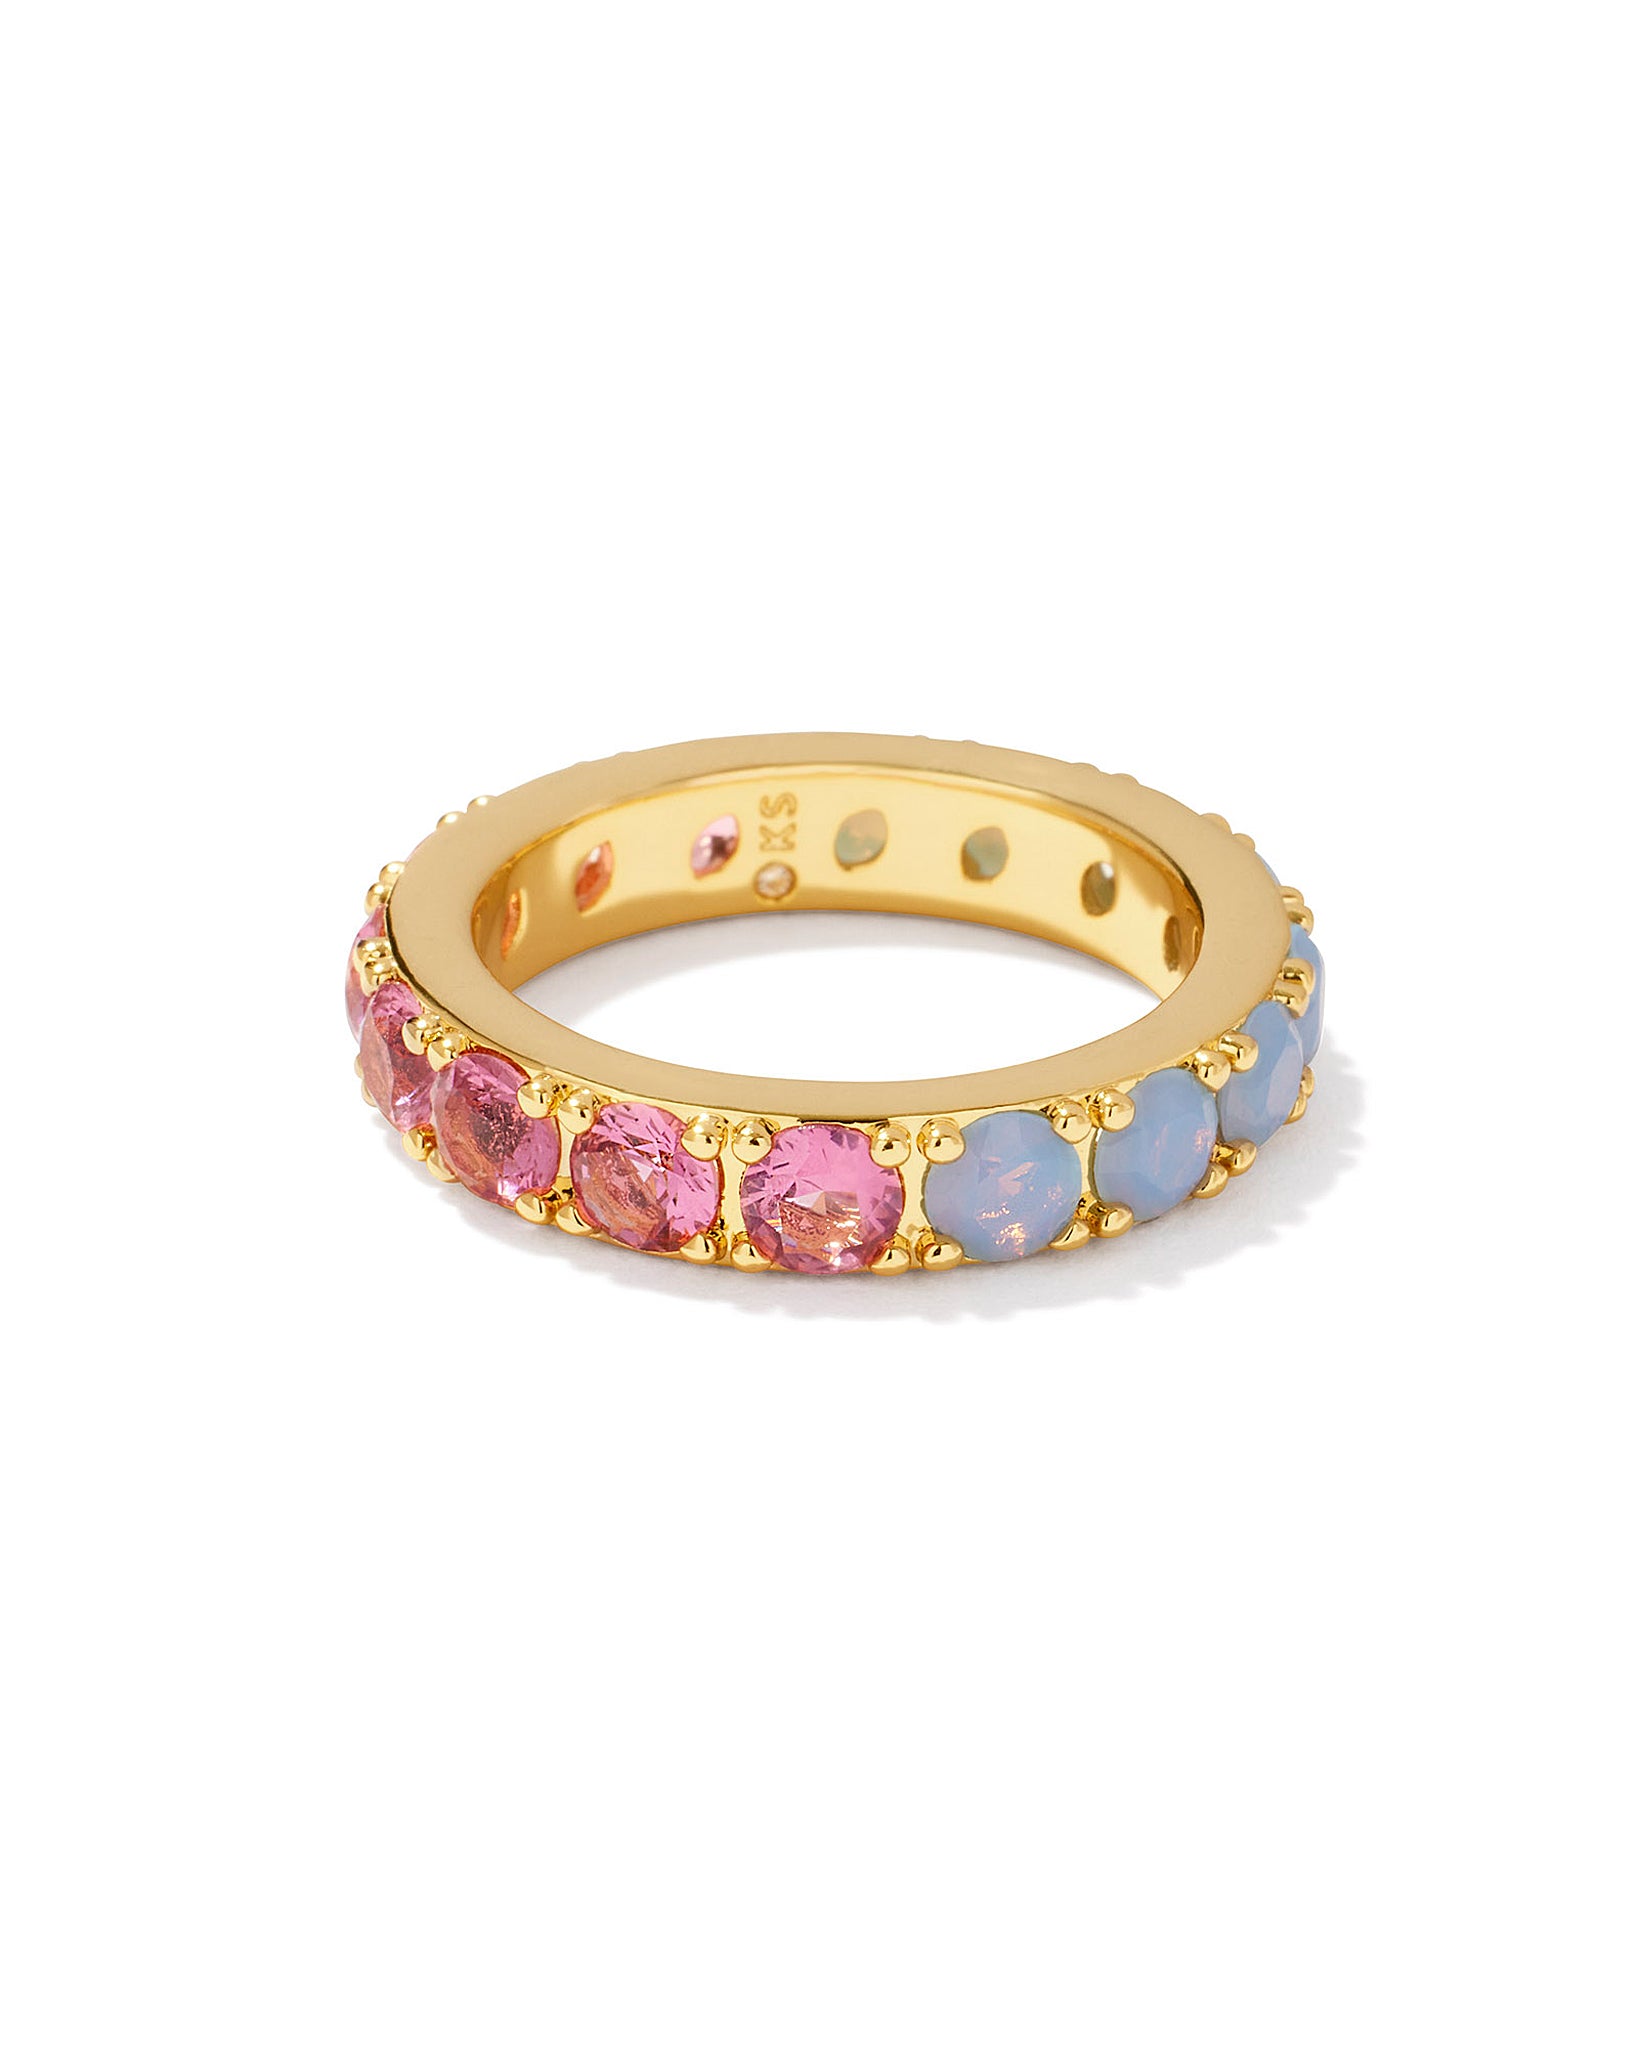 Kendra Scott Chandler Band Ring in Pink Blue Mix and Gold Size 7